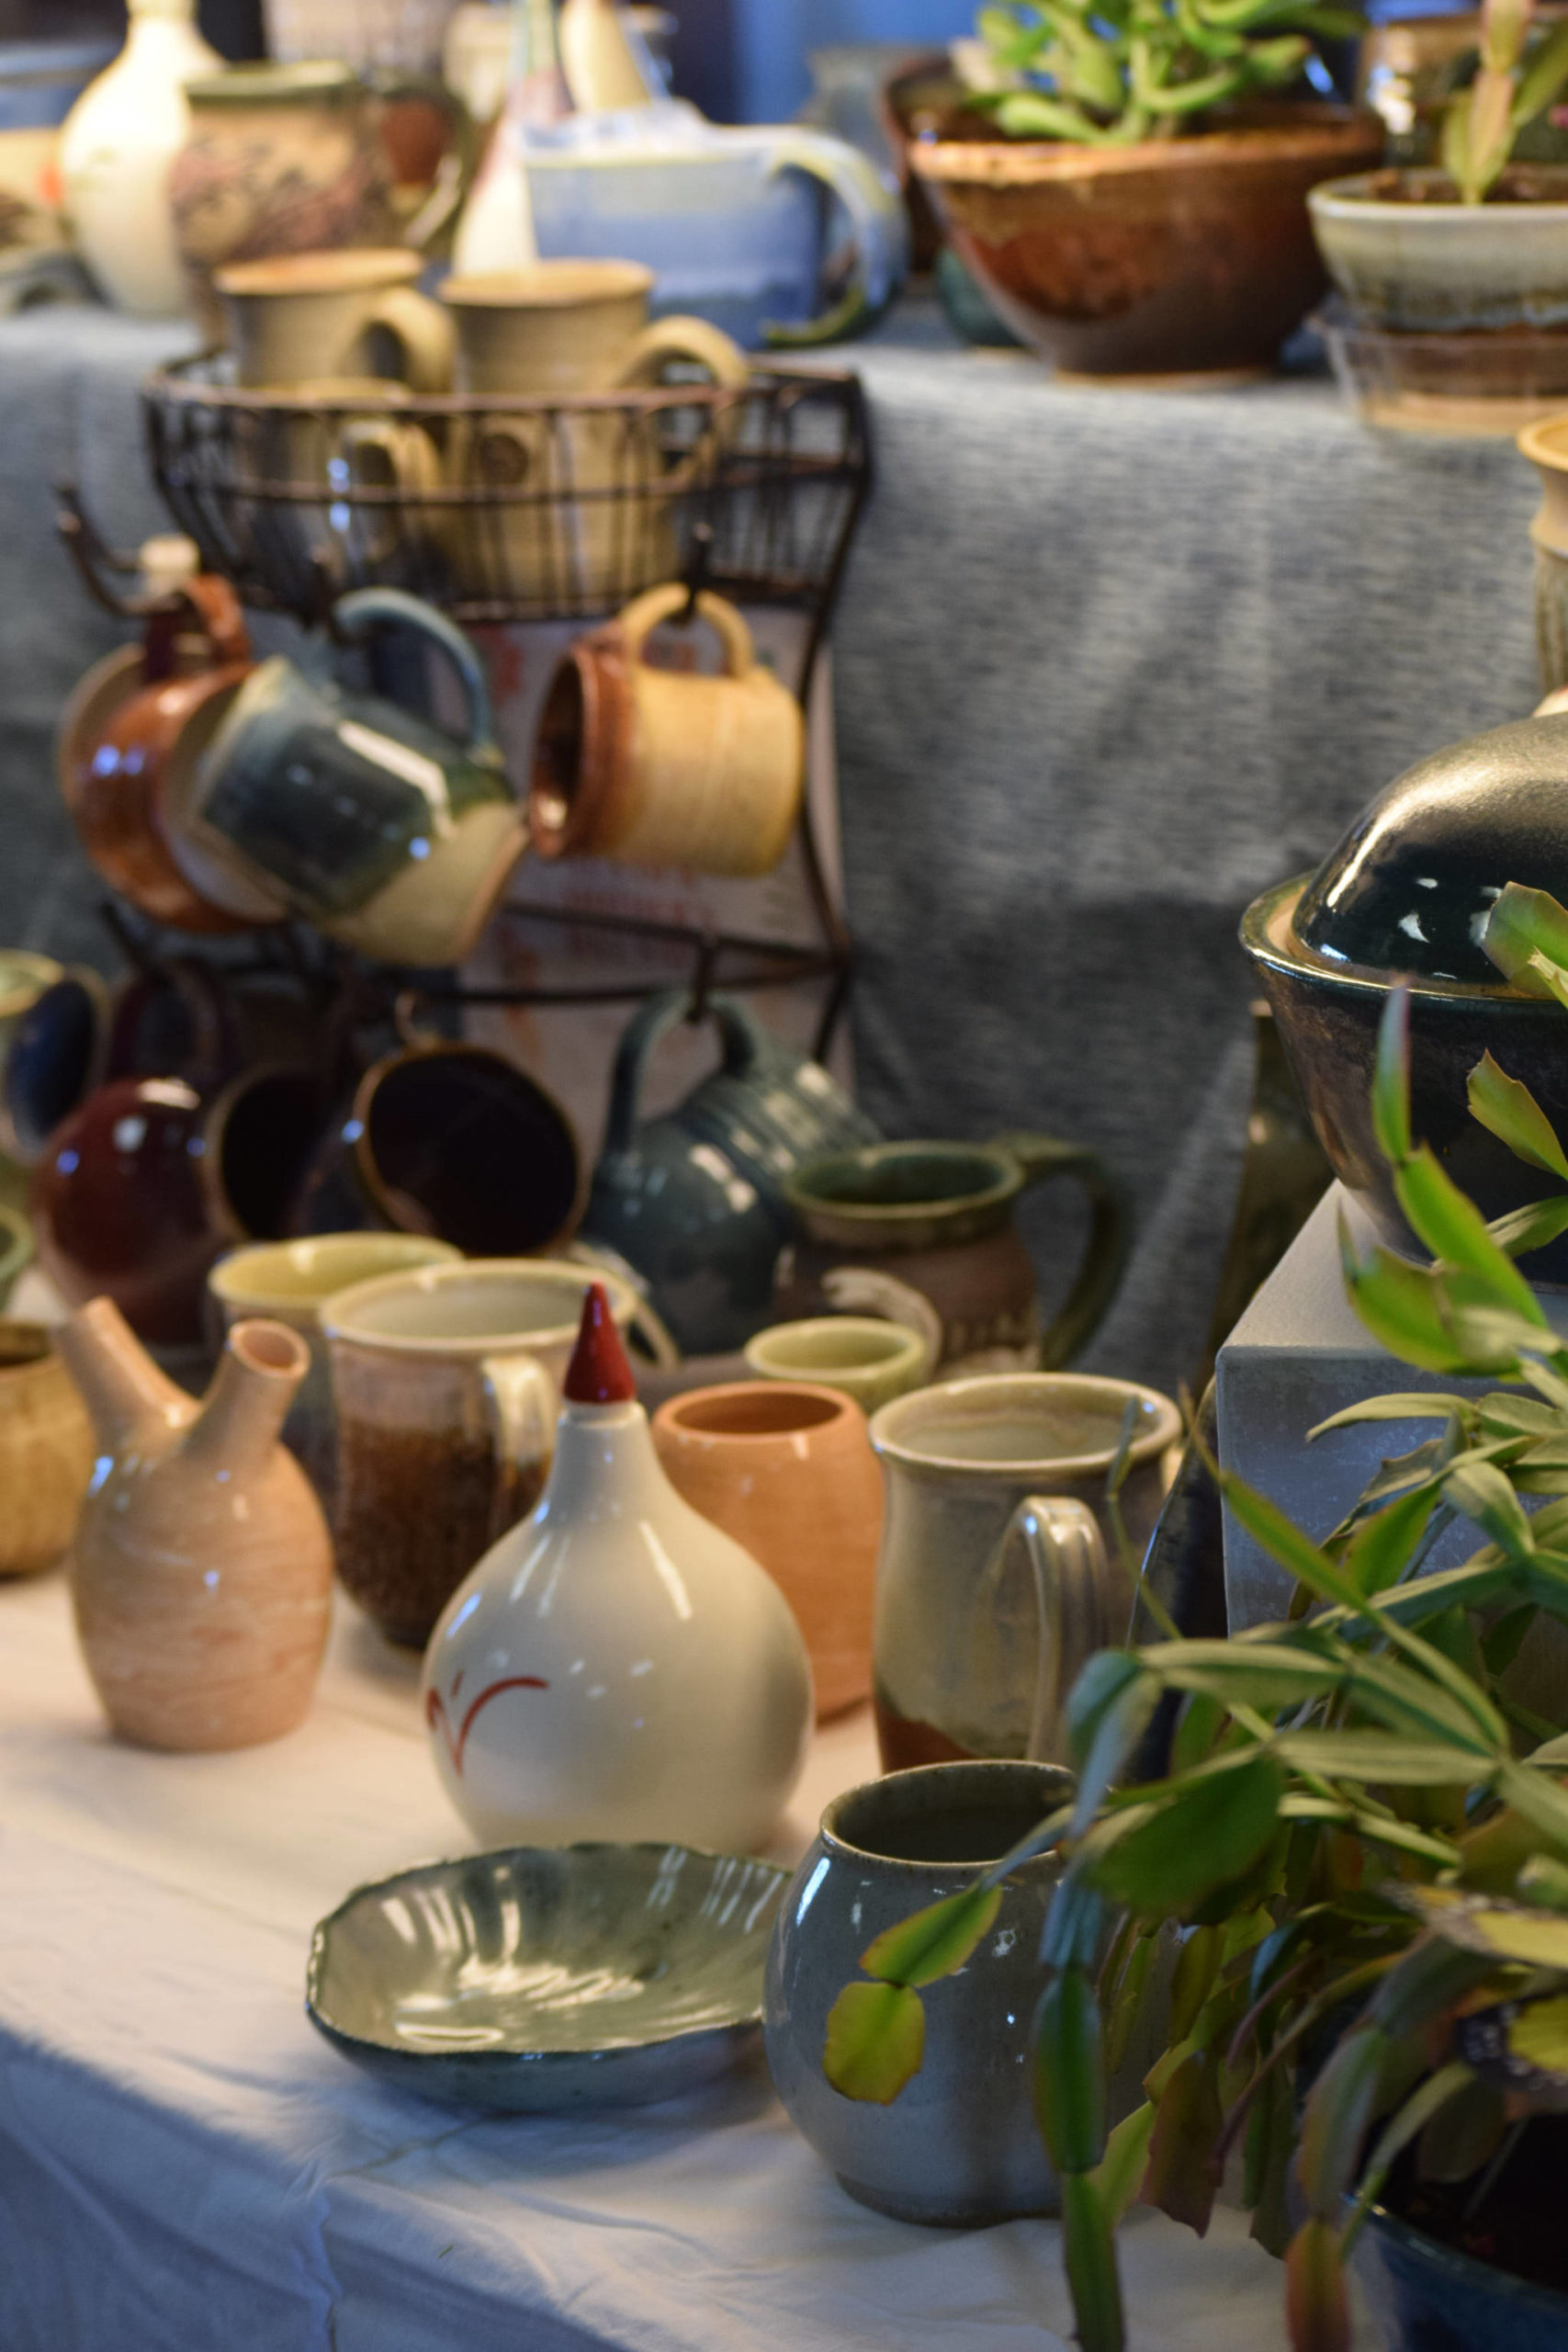 Hand-made ceramics are on display at the Kenai Potters Guild on Tuesday, April 27, 2021. Camille Botello / Peninsula Clarion